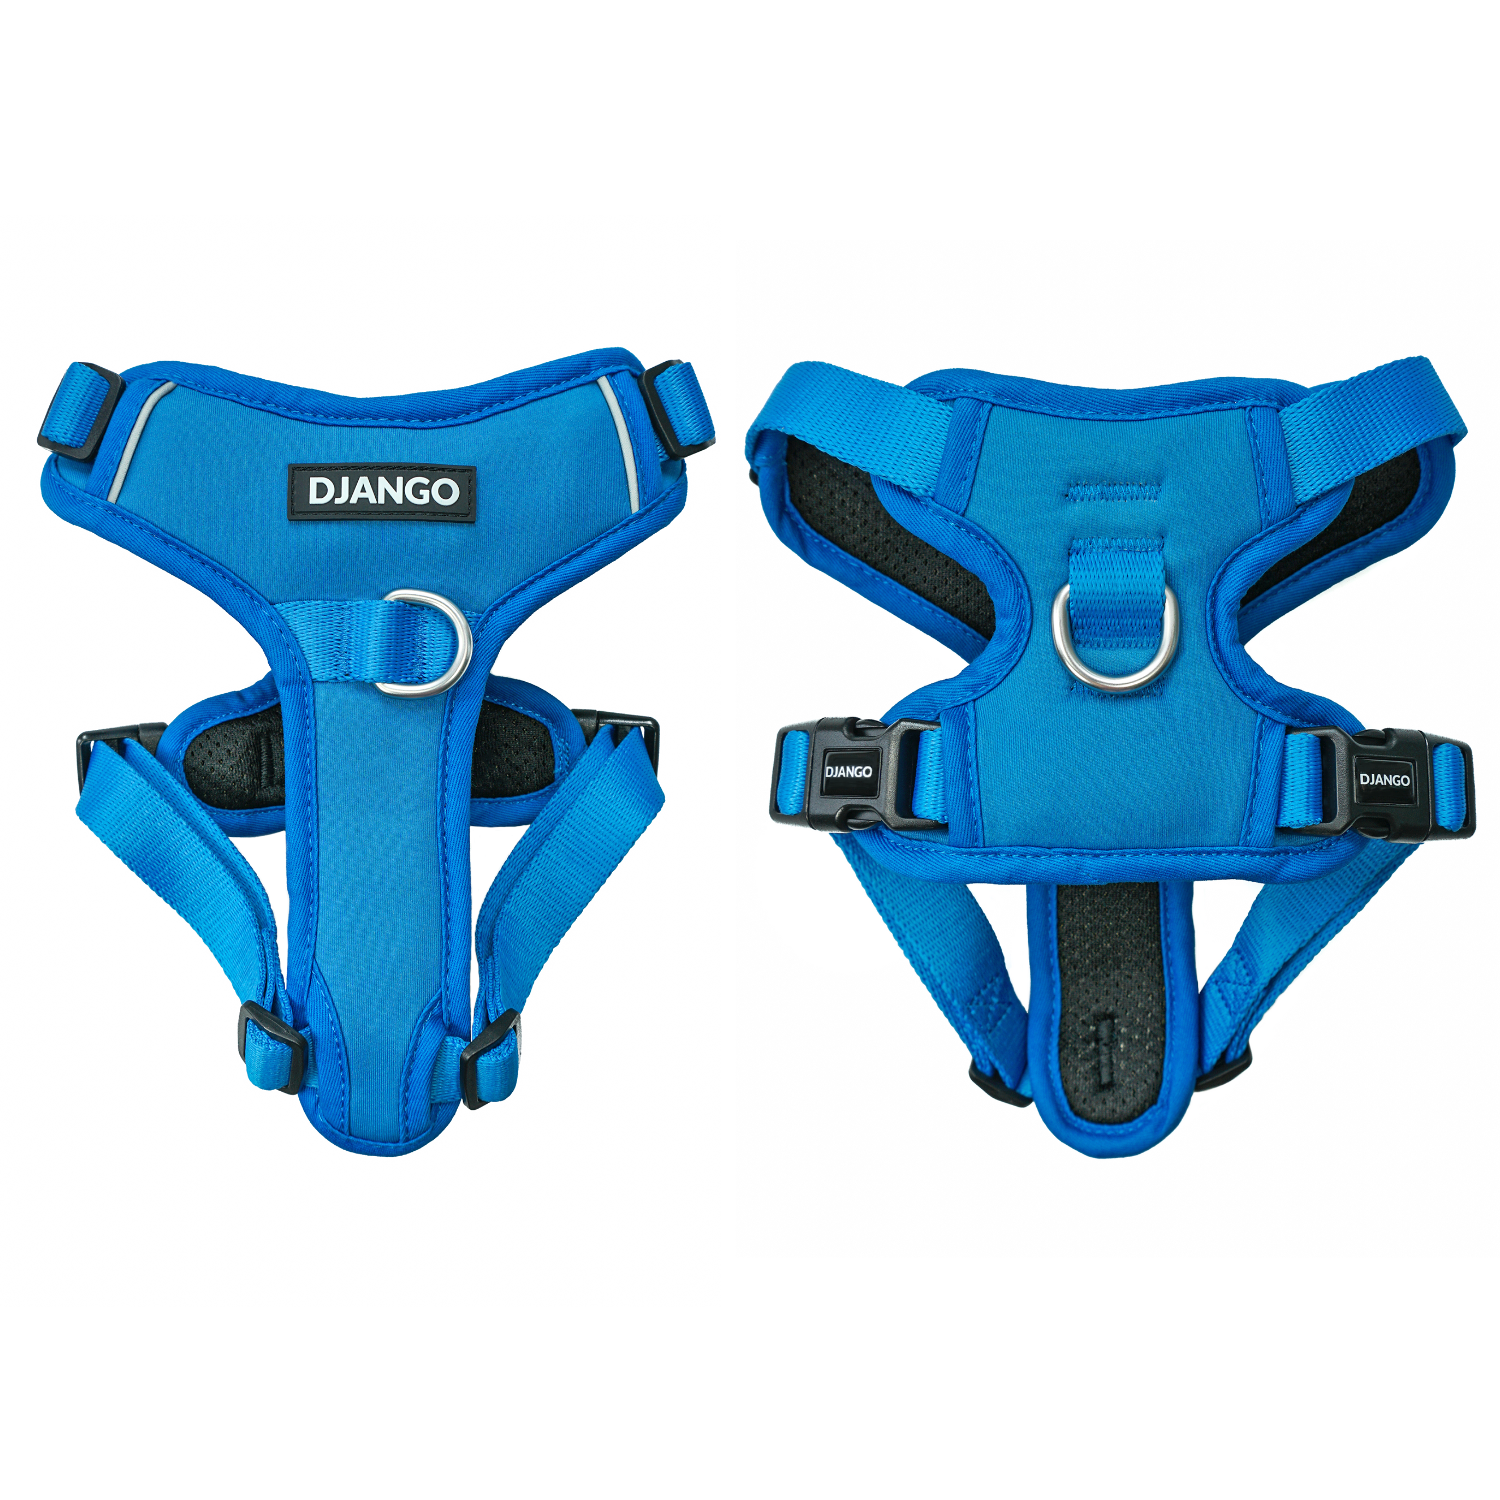 DJANGO Tahoe No Pull Dog Harness in Alpine Blue - Key features include a weather-resistant and padded neoprene exterior, a narrow and deep harness body (to prevent the risk of chafing) reflective piping, and soft webbing. Maisey is a miniature poodle and bichon mix and wears size small in all DJANGO dog harnesses. - djangobrand.com